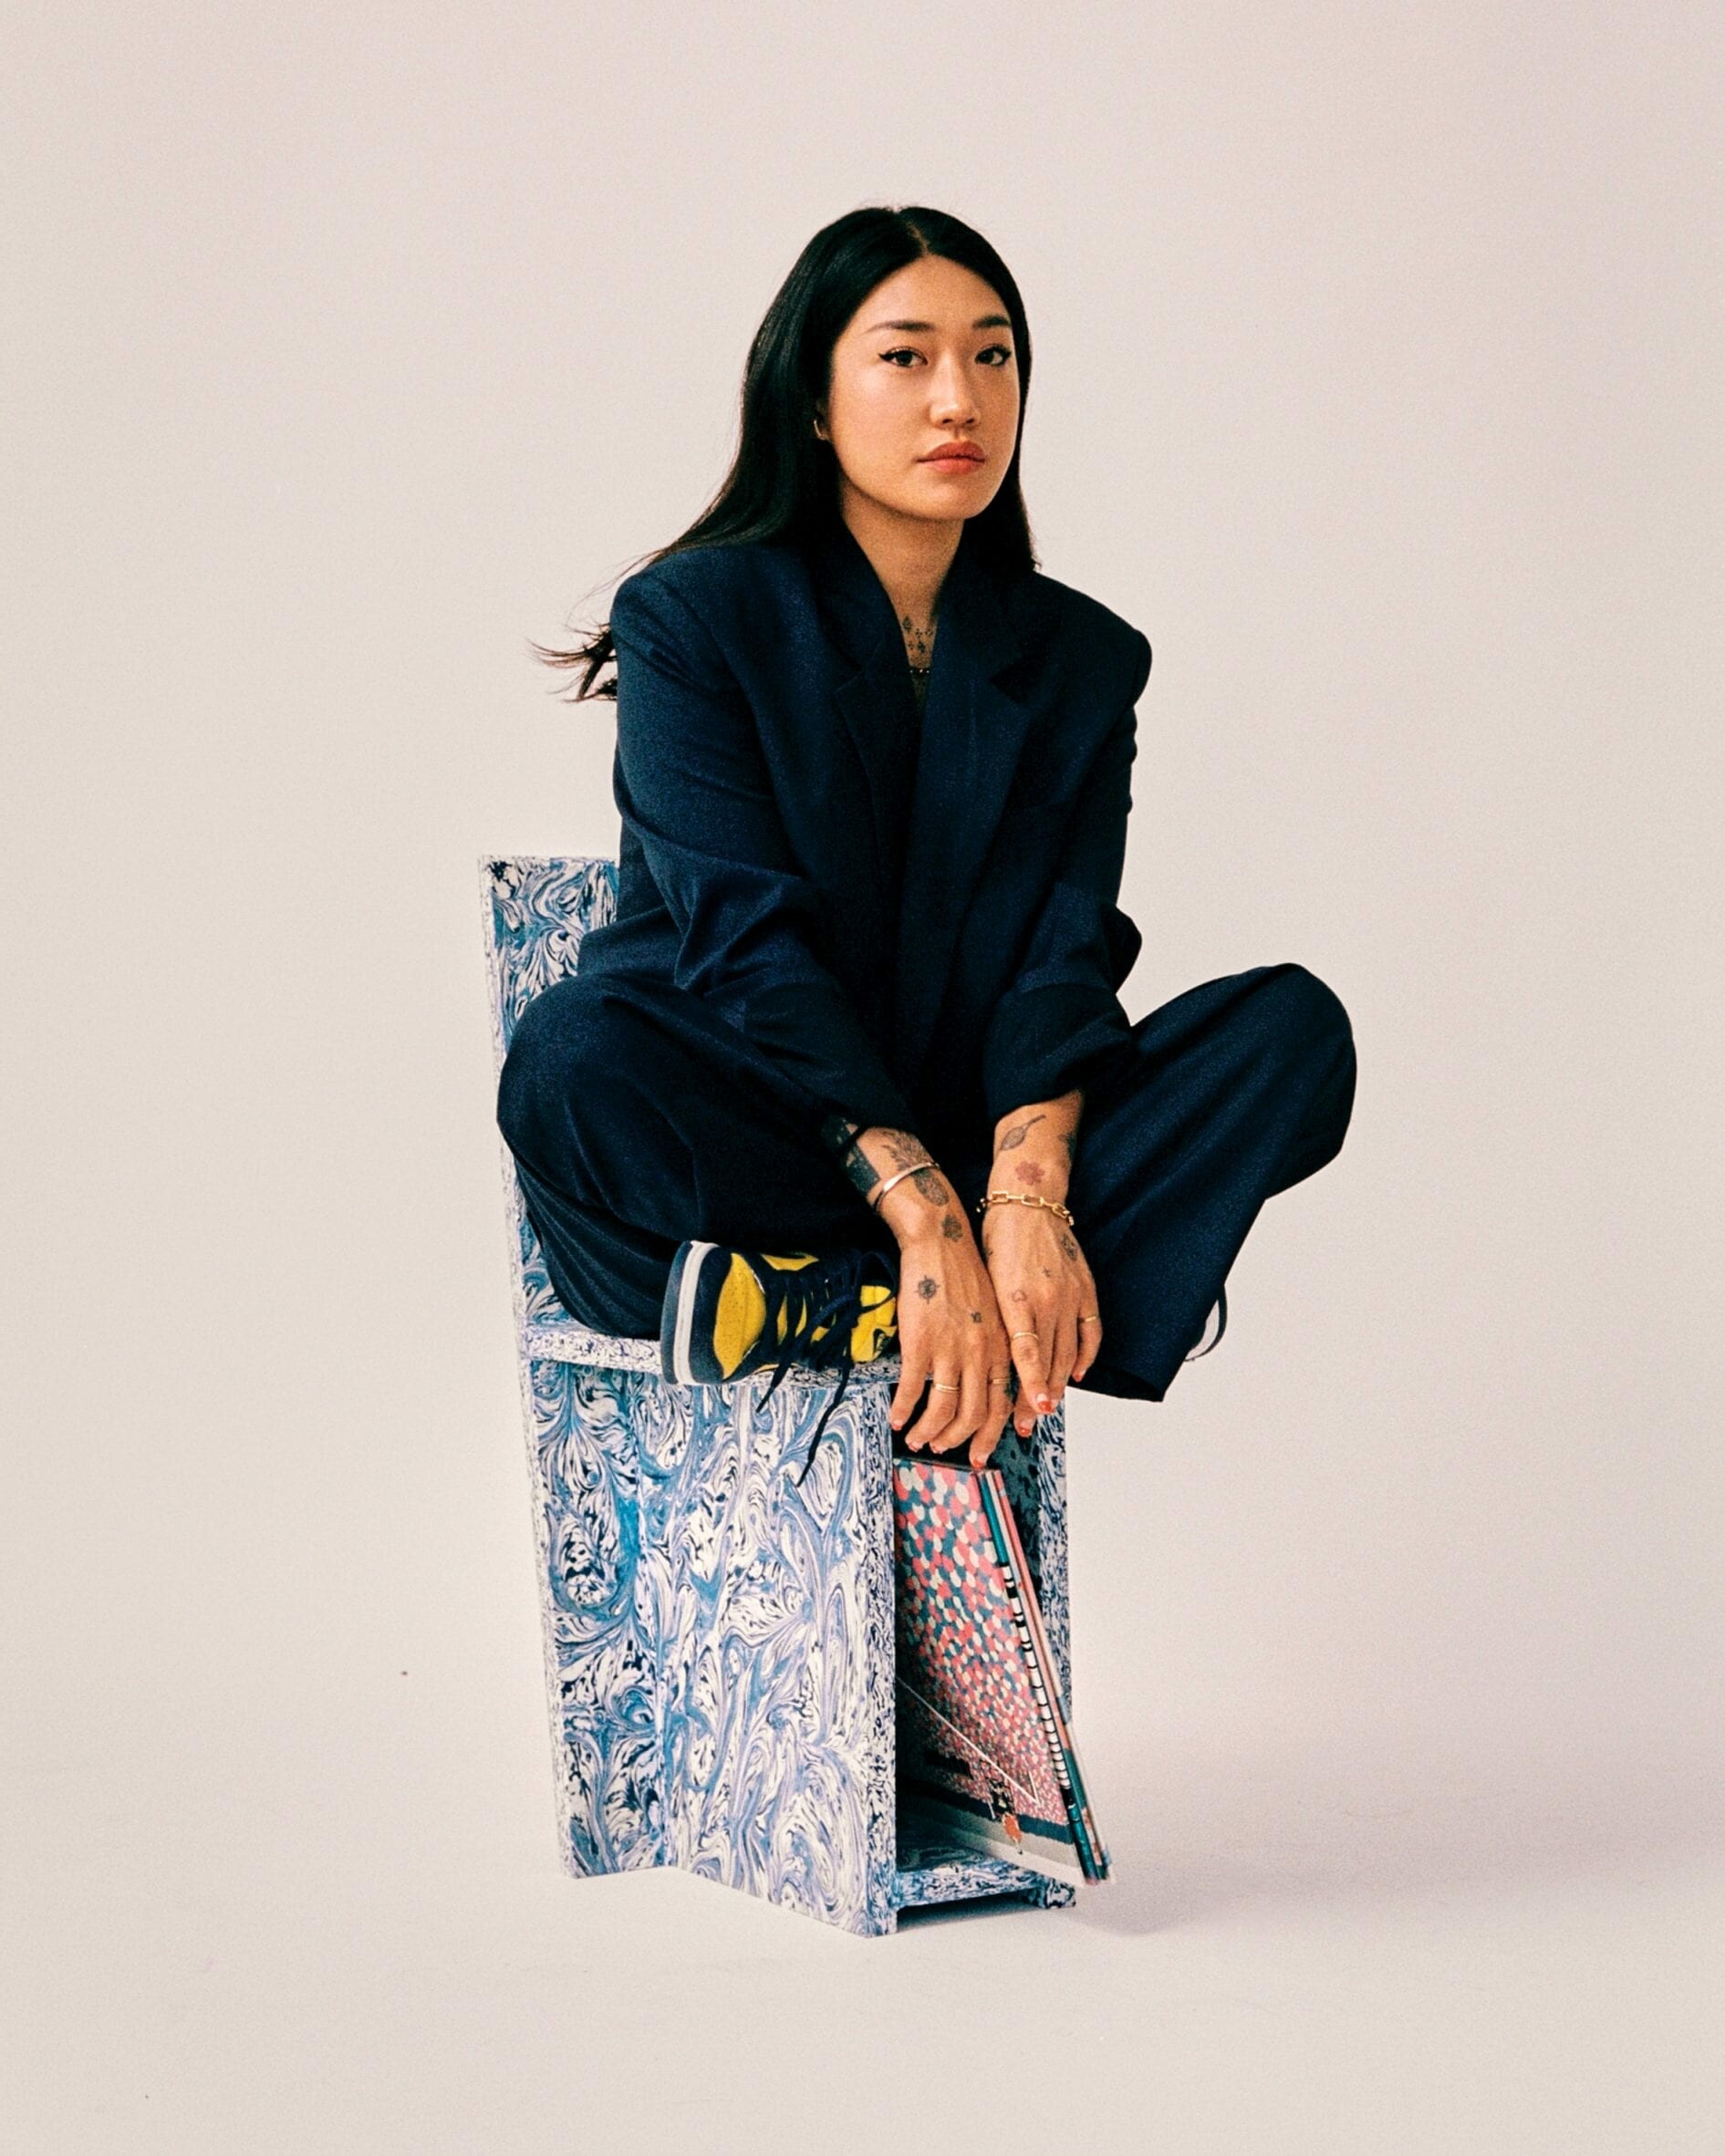 Peggy Gou: Made her recording debut on Radio Slave's Rekids label, 2016. 1900x2370 HD Wallpaper.